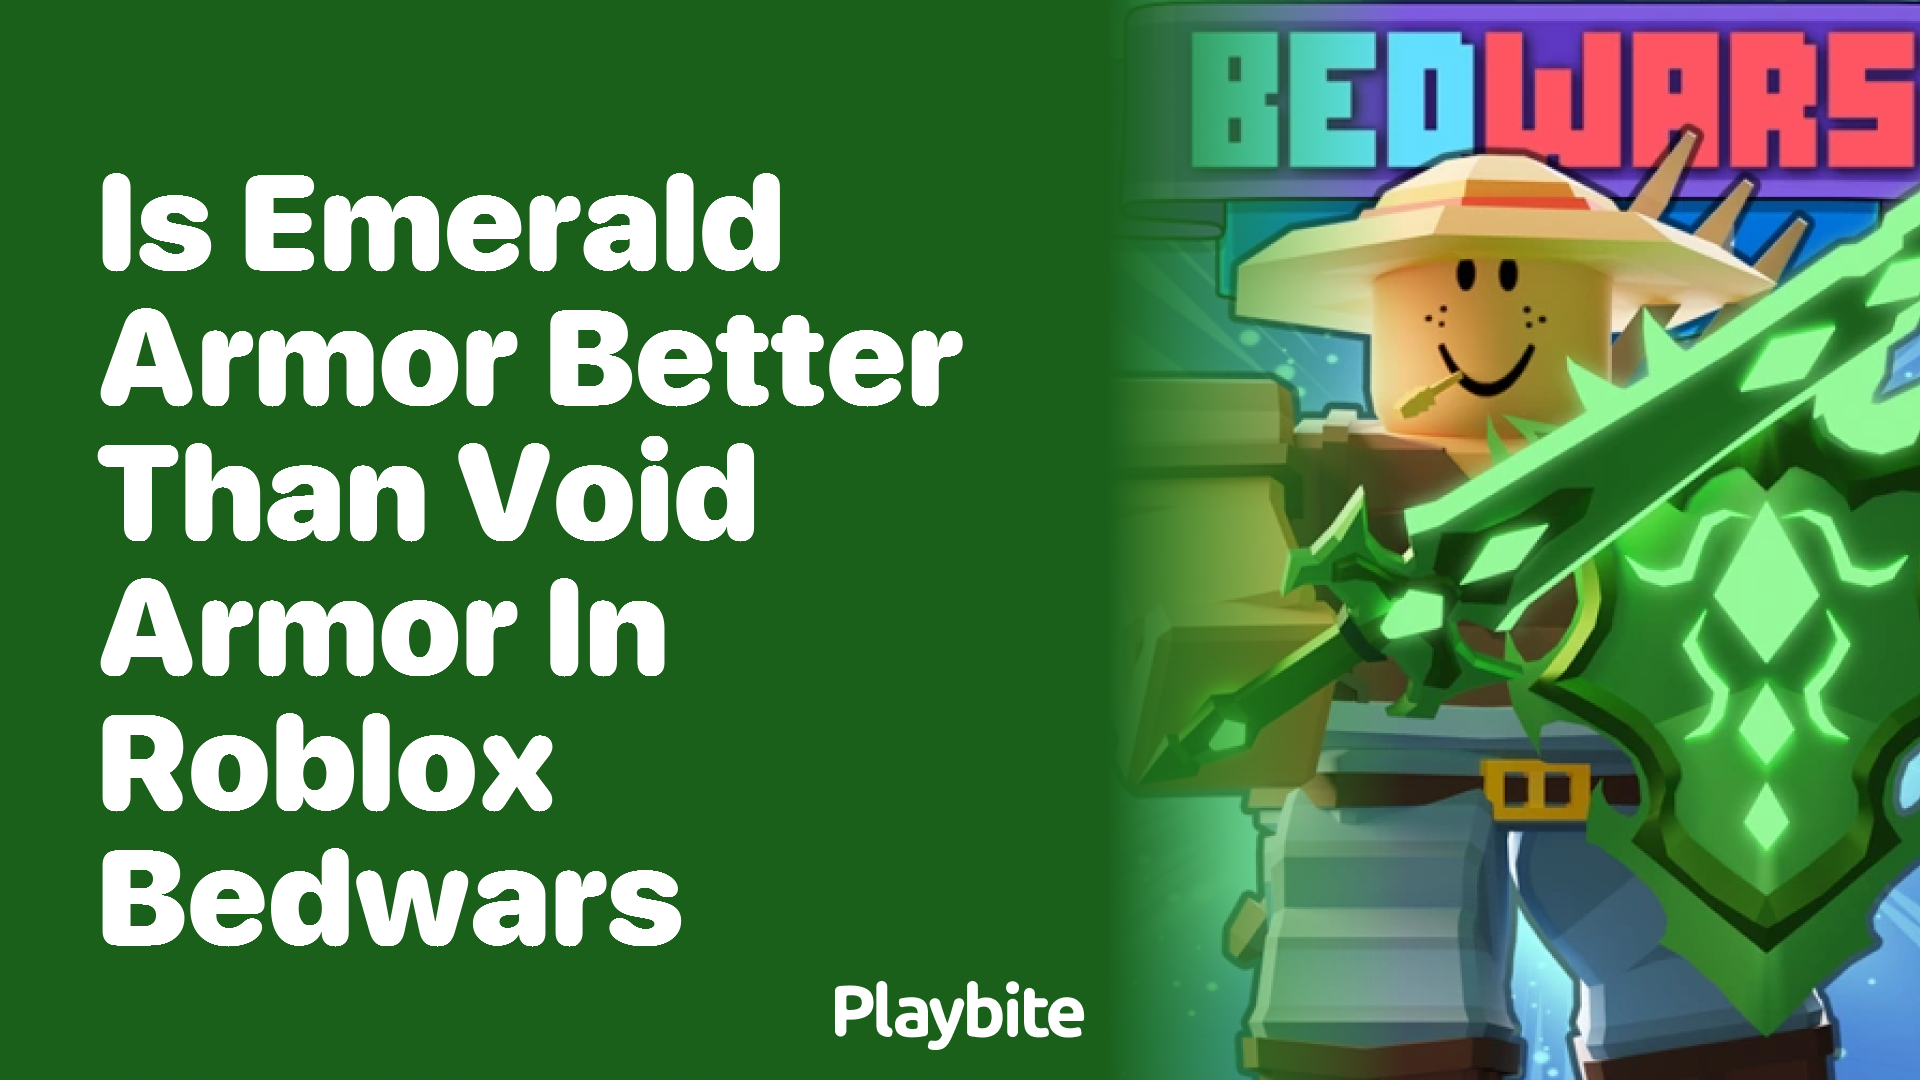 Is Emerald Armor Better Than Void Armor in Roblox Bedwars?